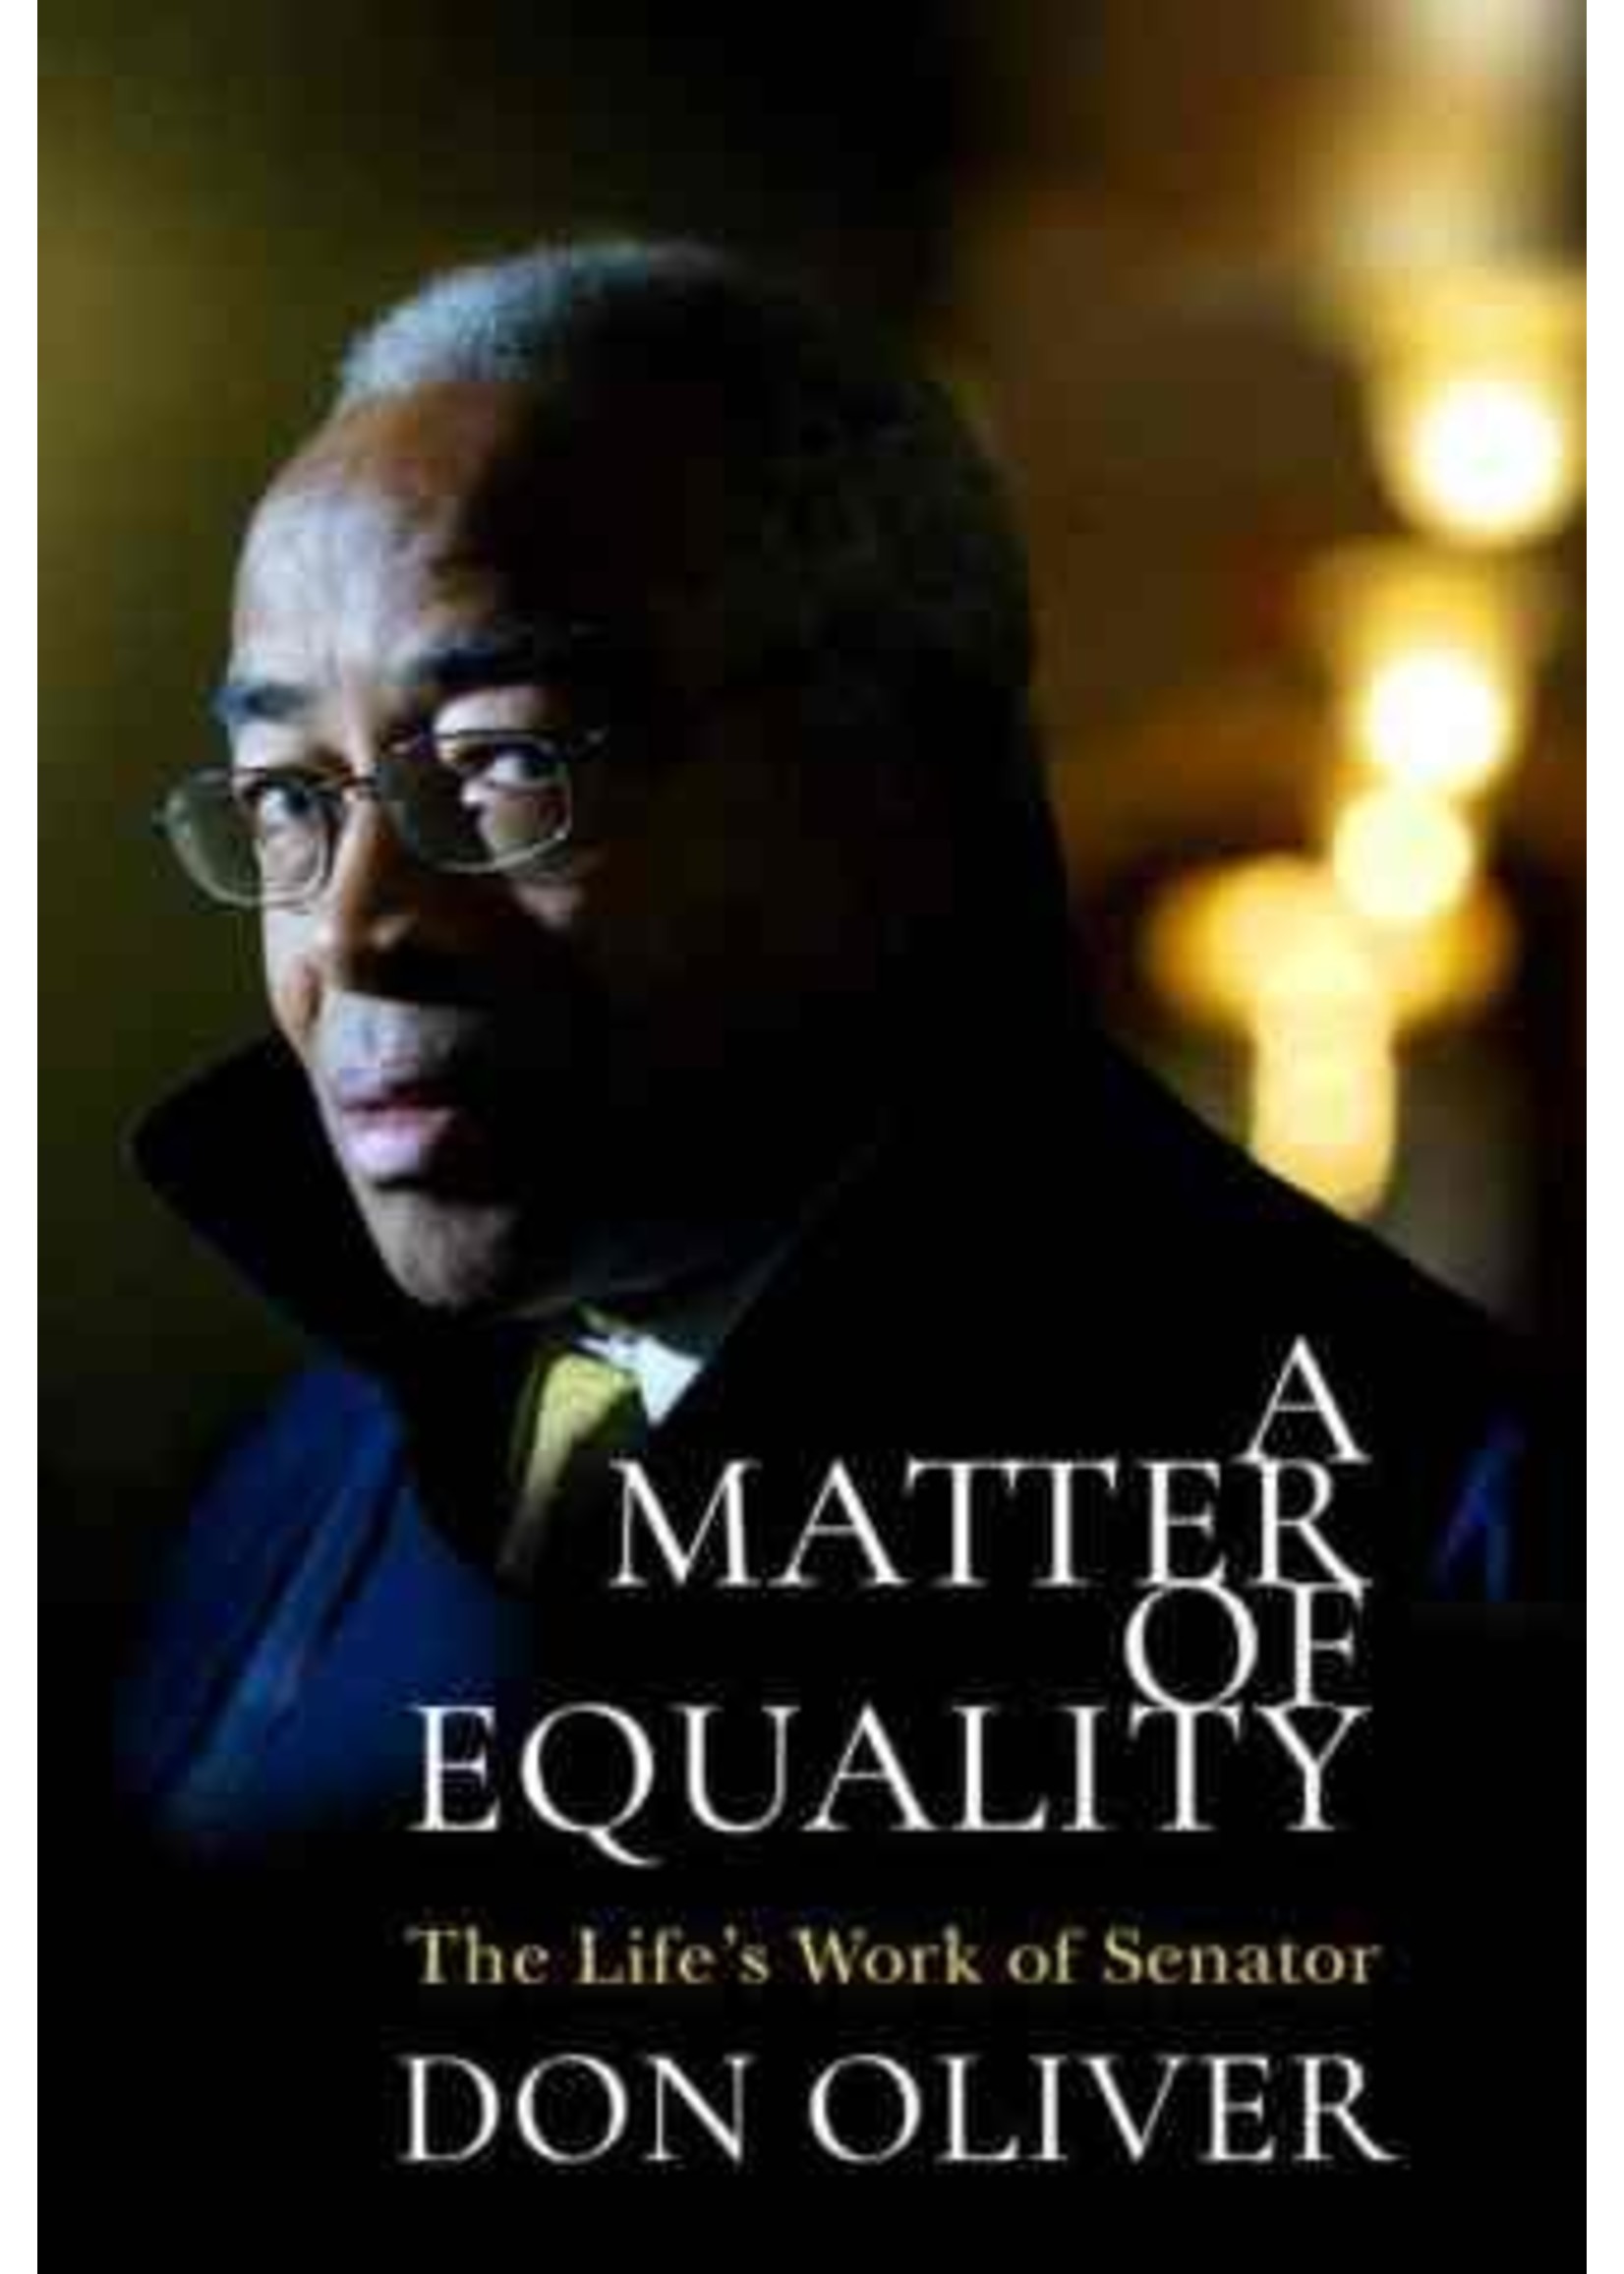 A Matter of Equality: The Life's Work of Senator Don Oliver by Donald Oliver